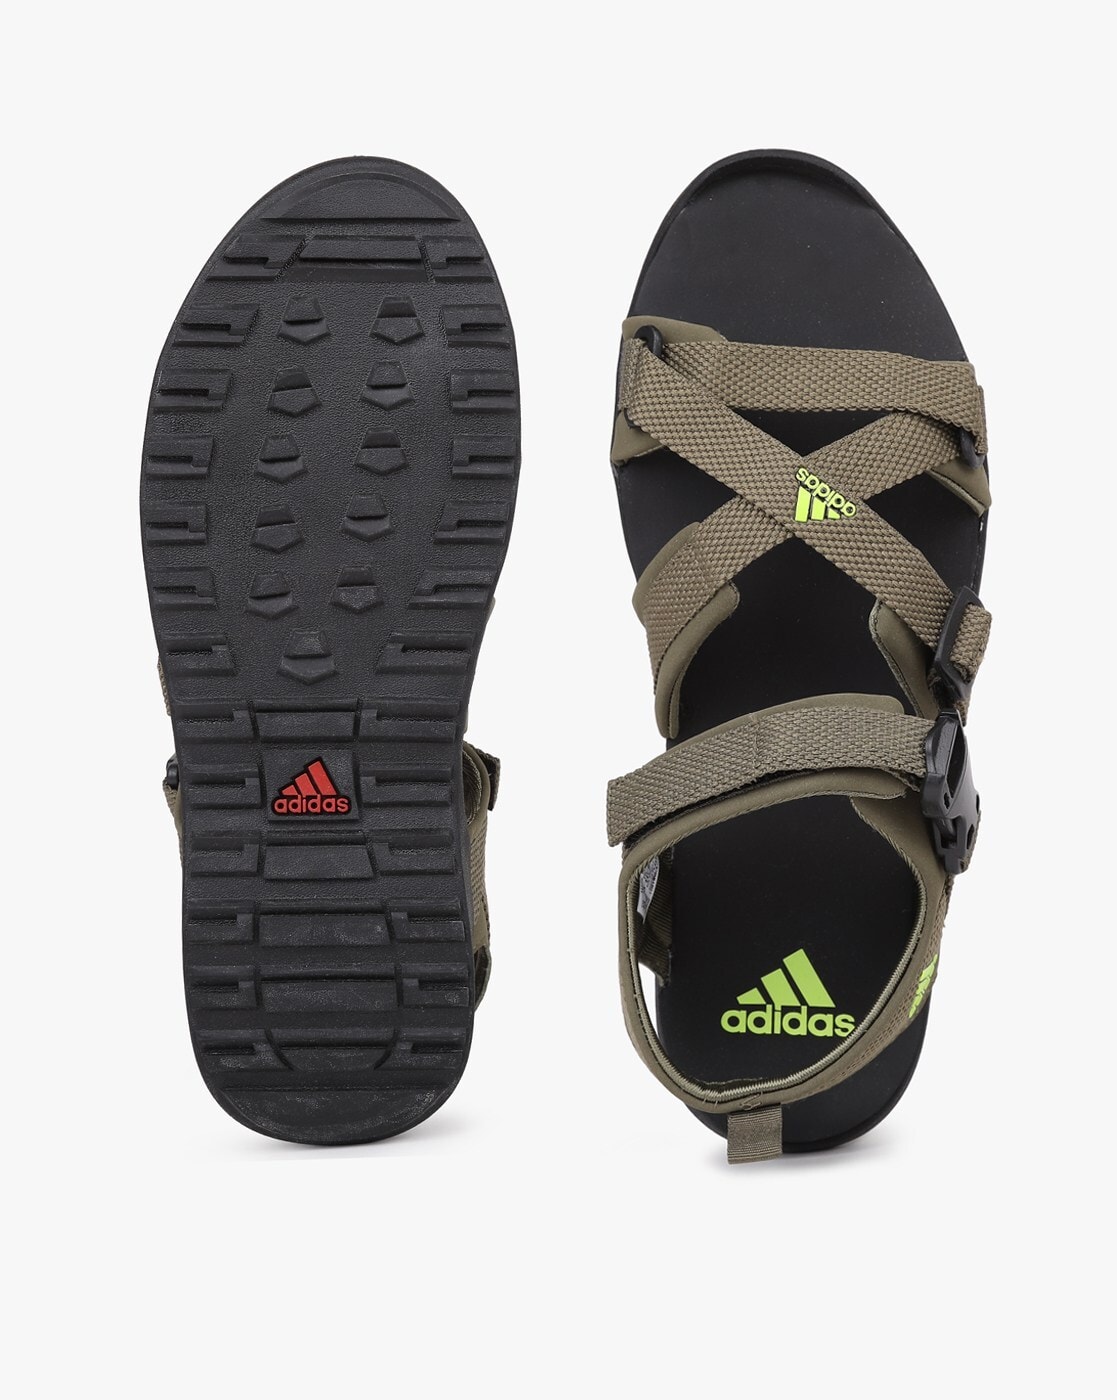 adidas olive green sandals